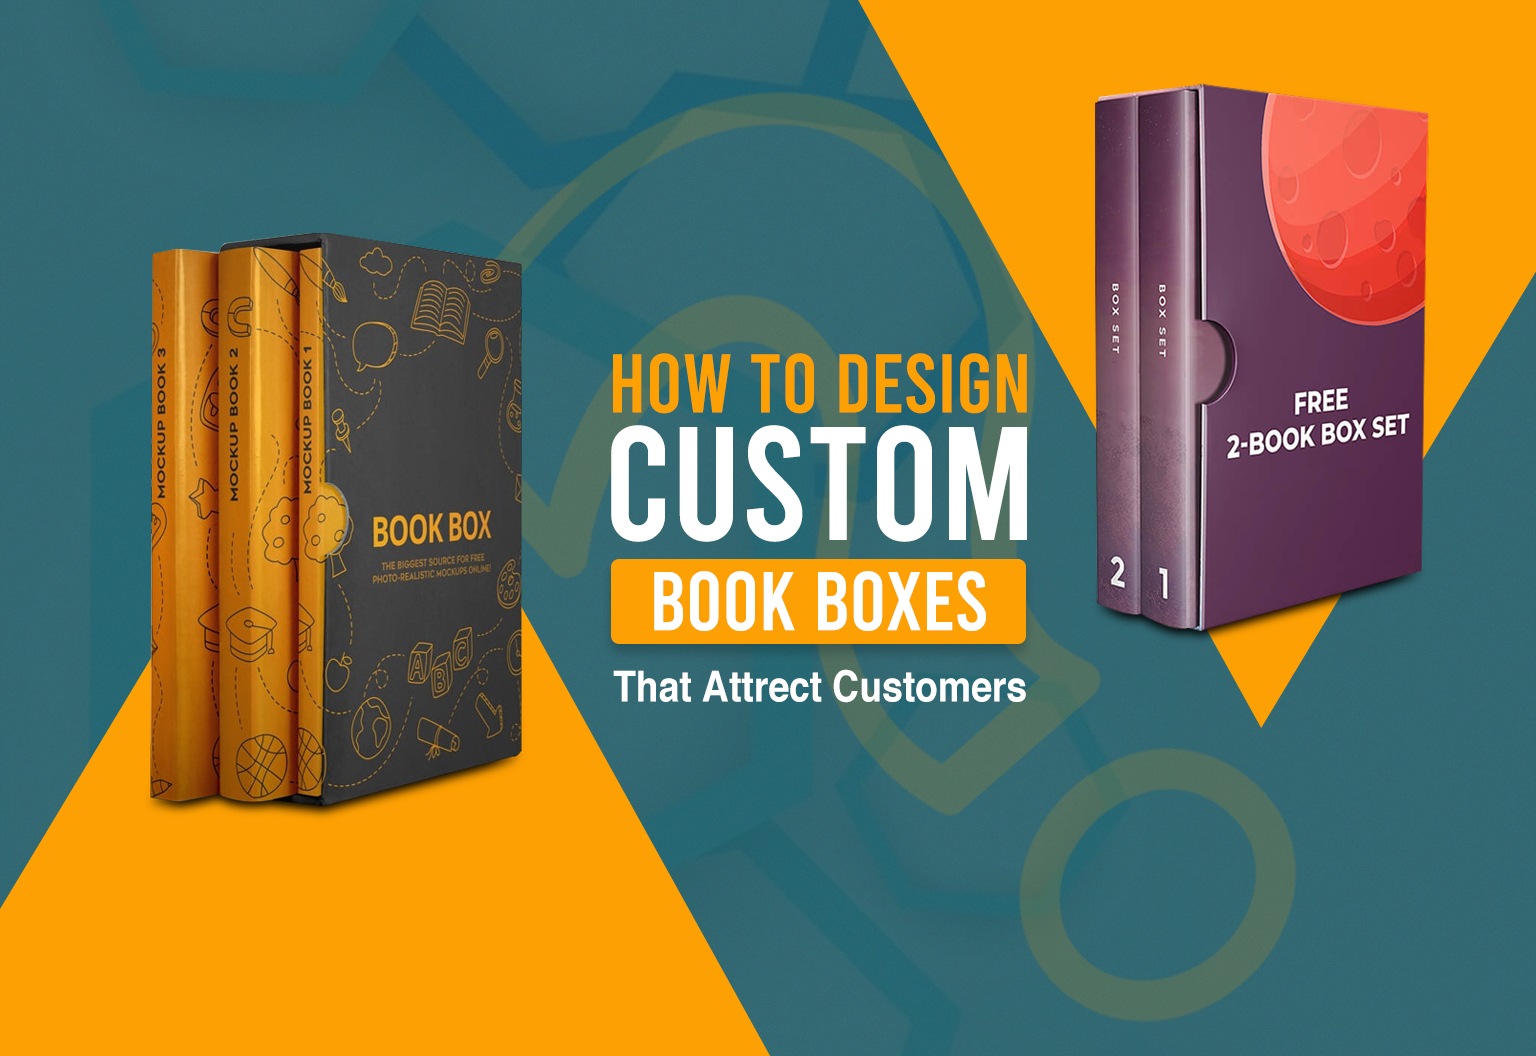 How to Design Custom Book Boxes That Attract Customers